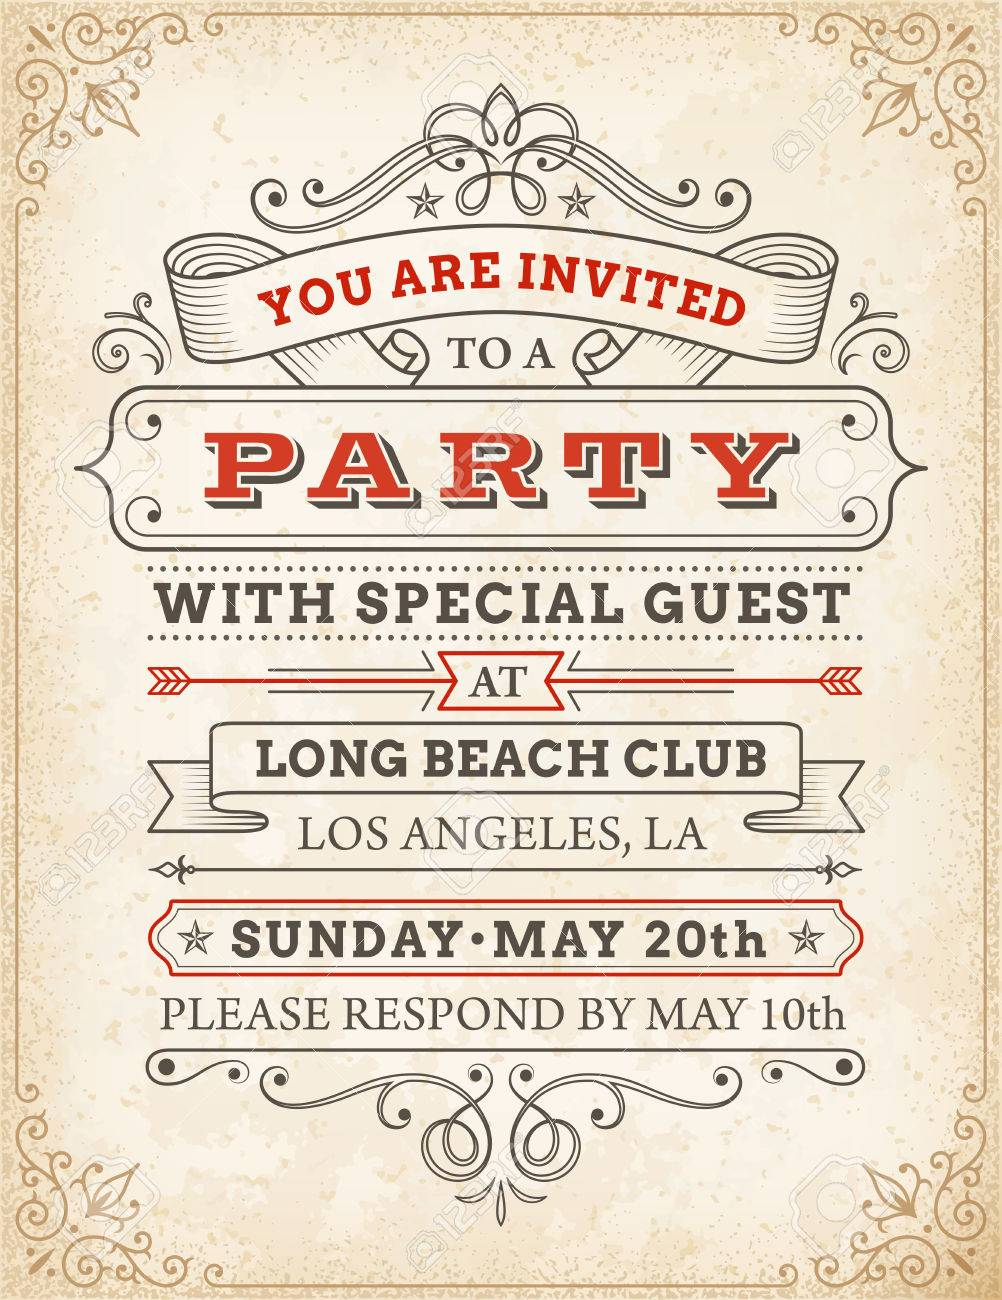 An High Detail Grunge Vintage Invitation Template To A Party within size 1002 X 1300